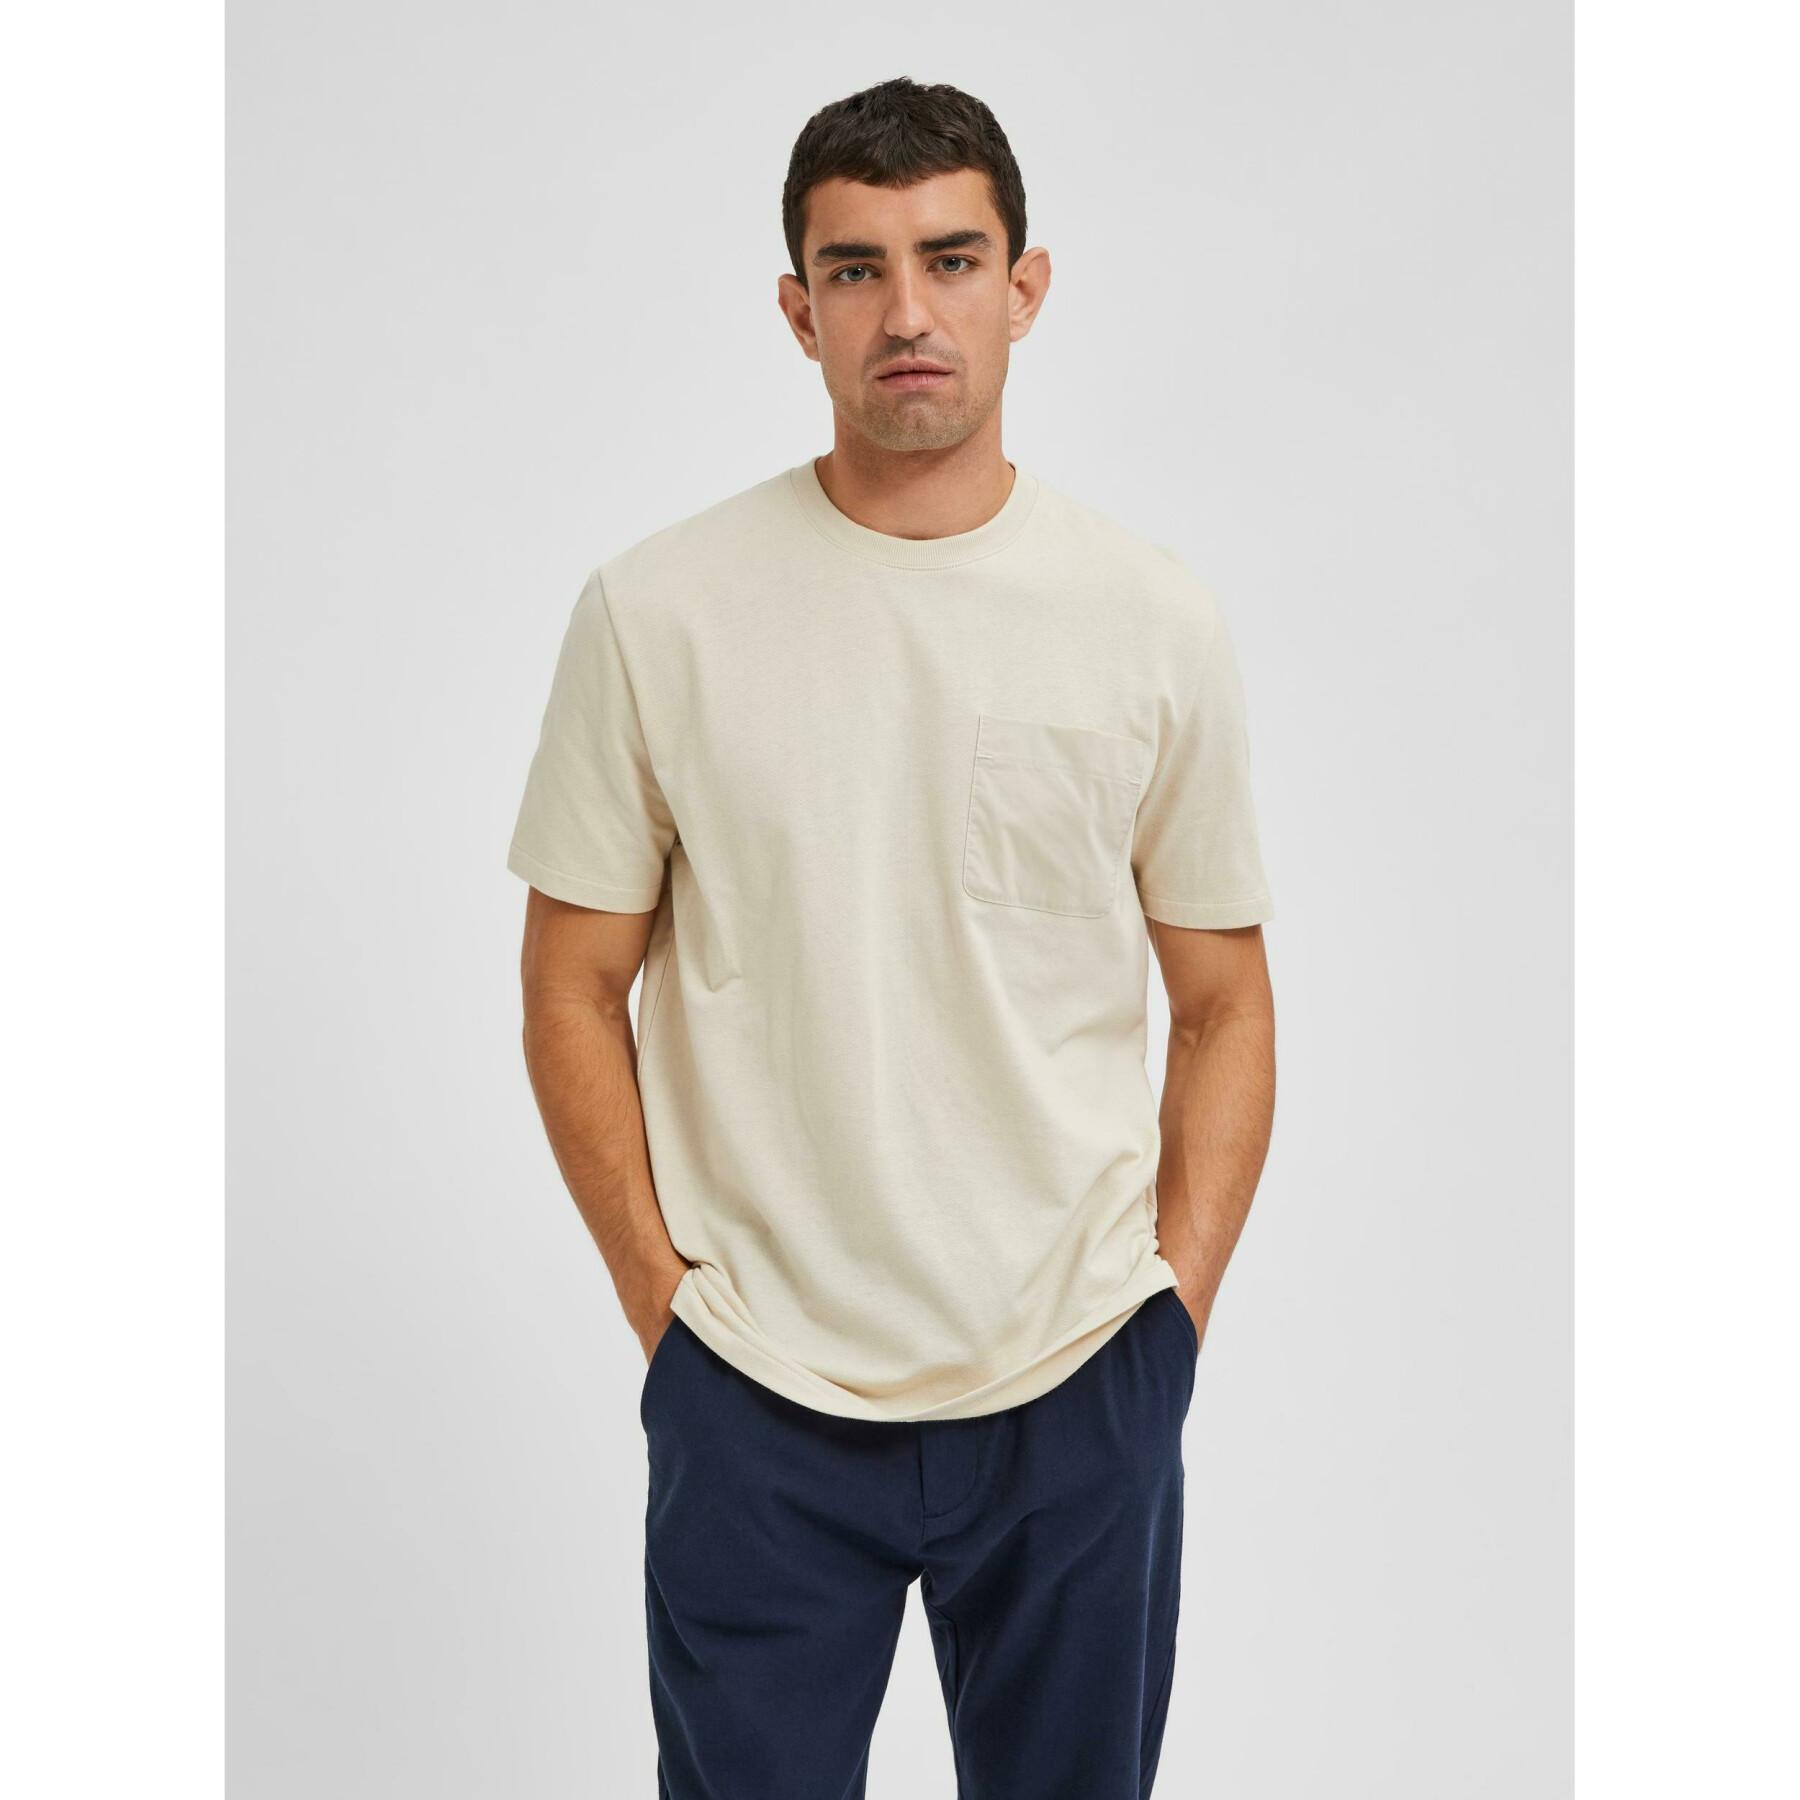 Camiseta Collar-o Selected Slhrelaxarvid